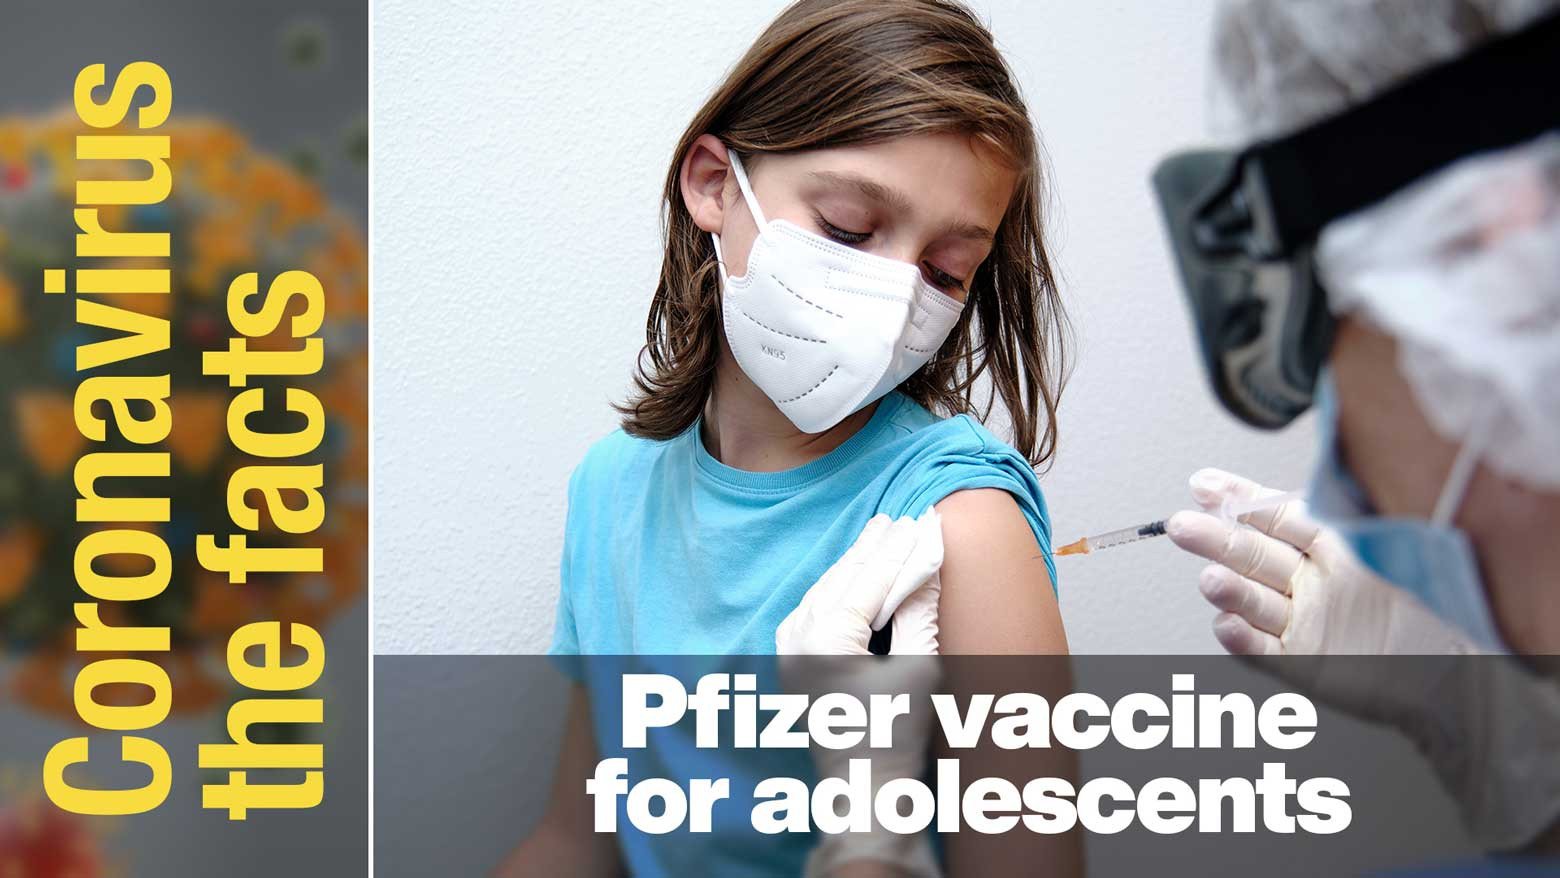 The US authorizes Pfizer vaccine for children aged 12 to 15